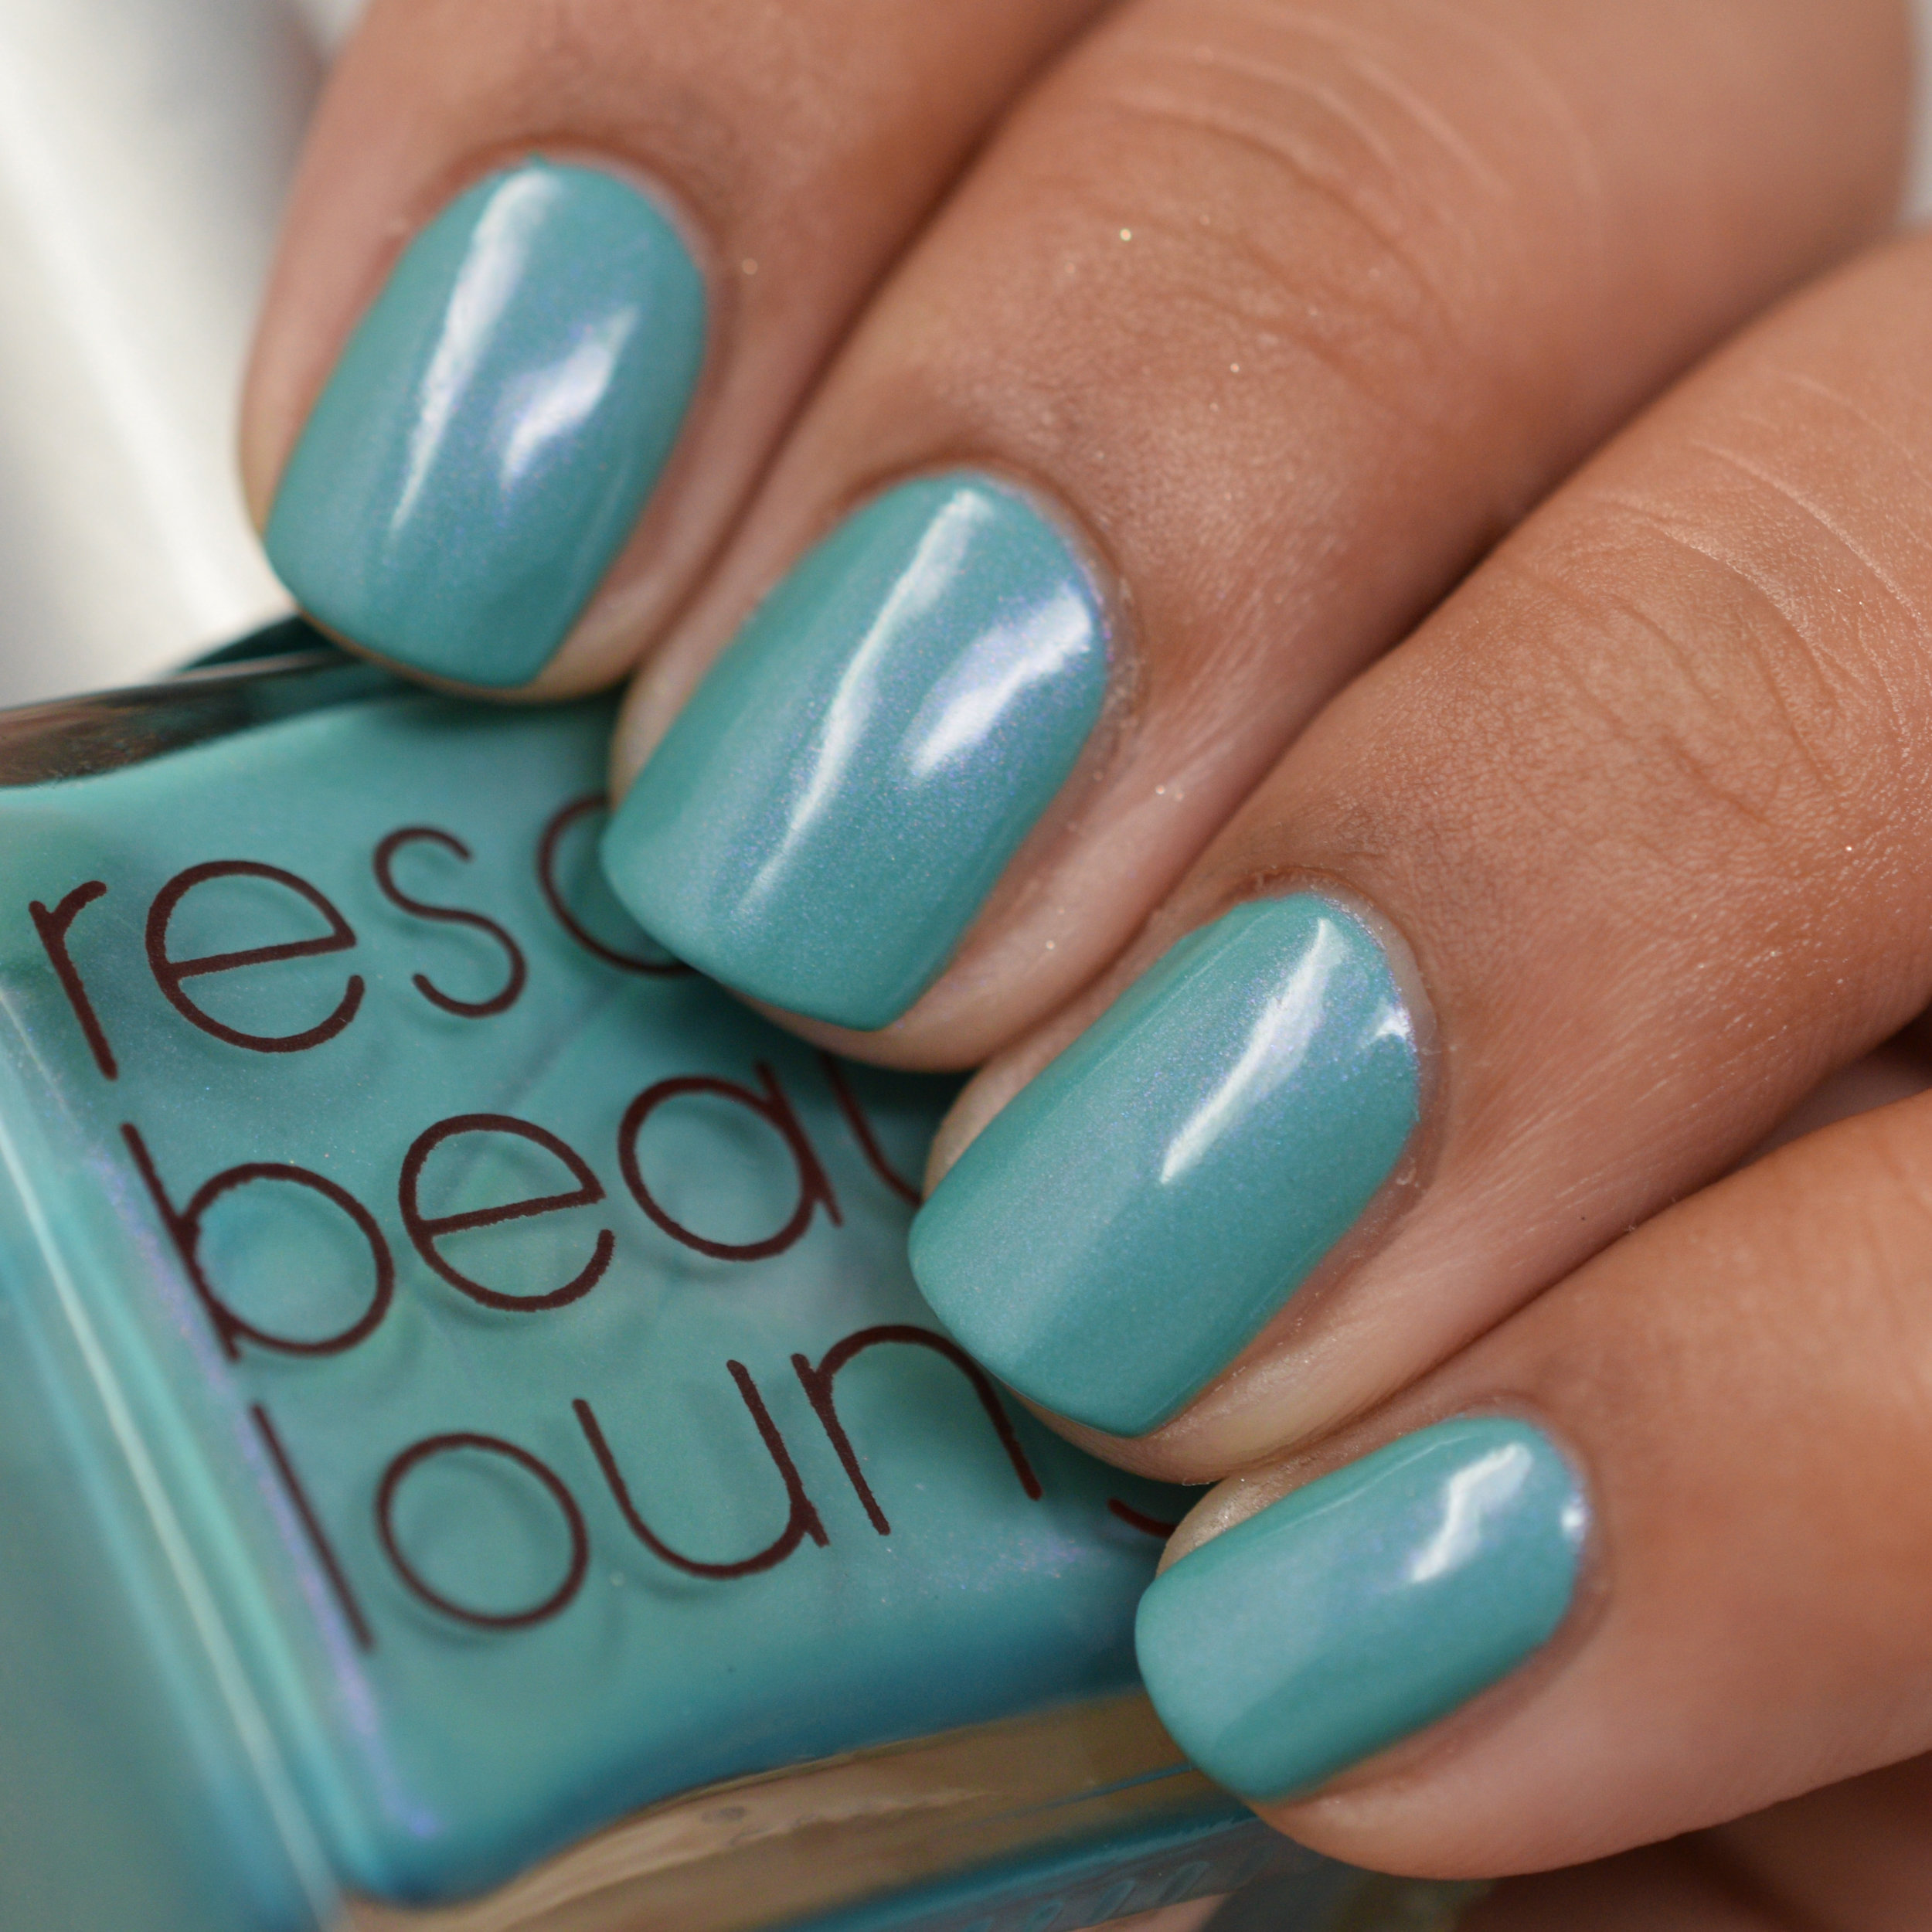 Rescue Beauty Lounge Fan Collection Spring 2012 - Aqua Lily.jpg